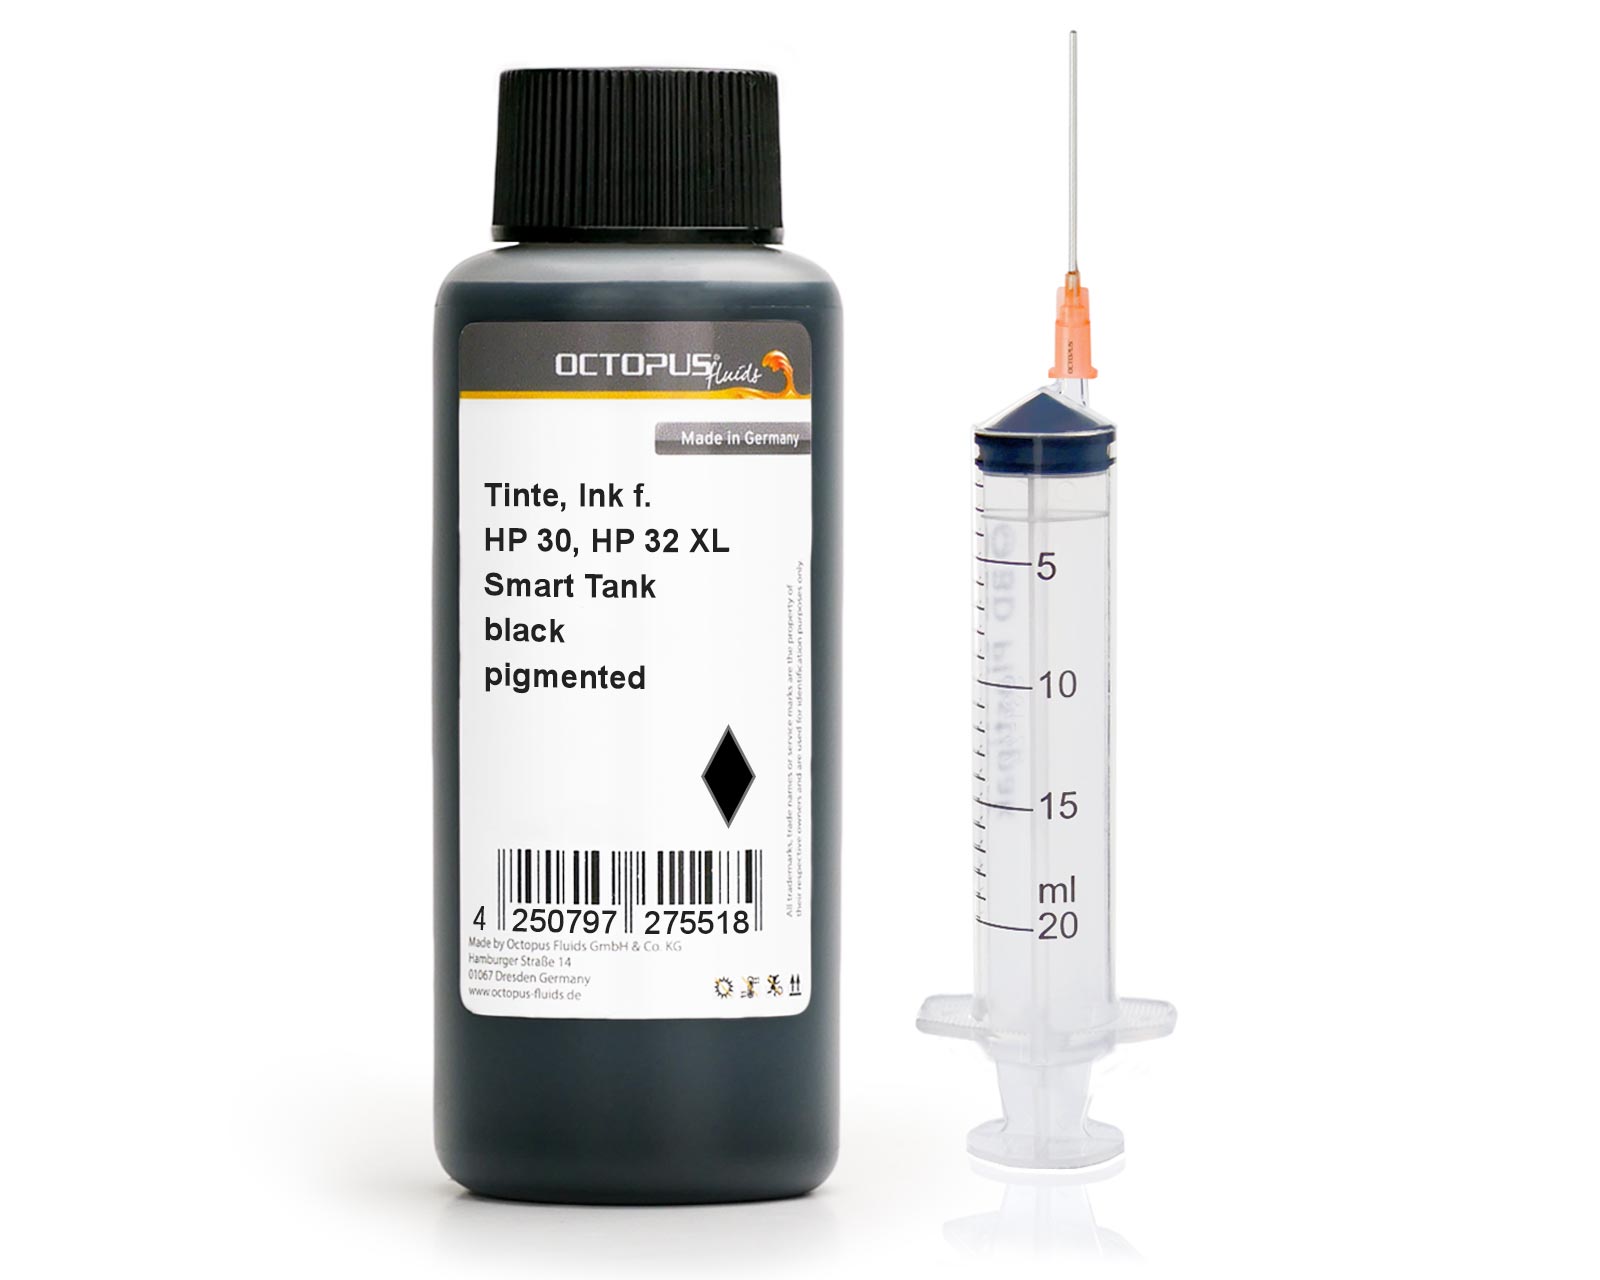 Refill ink for HP 30, 32, Smart Tank, black pigmented with syringe